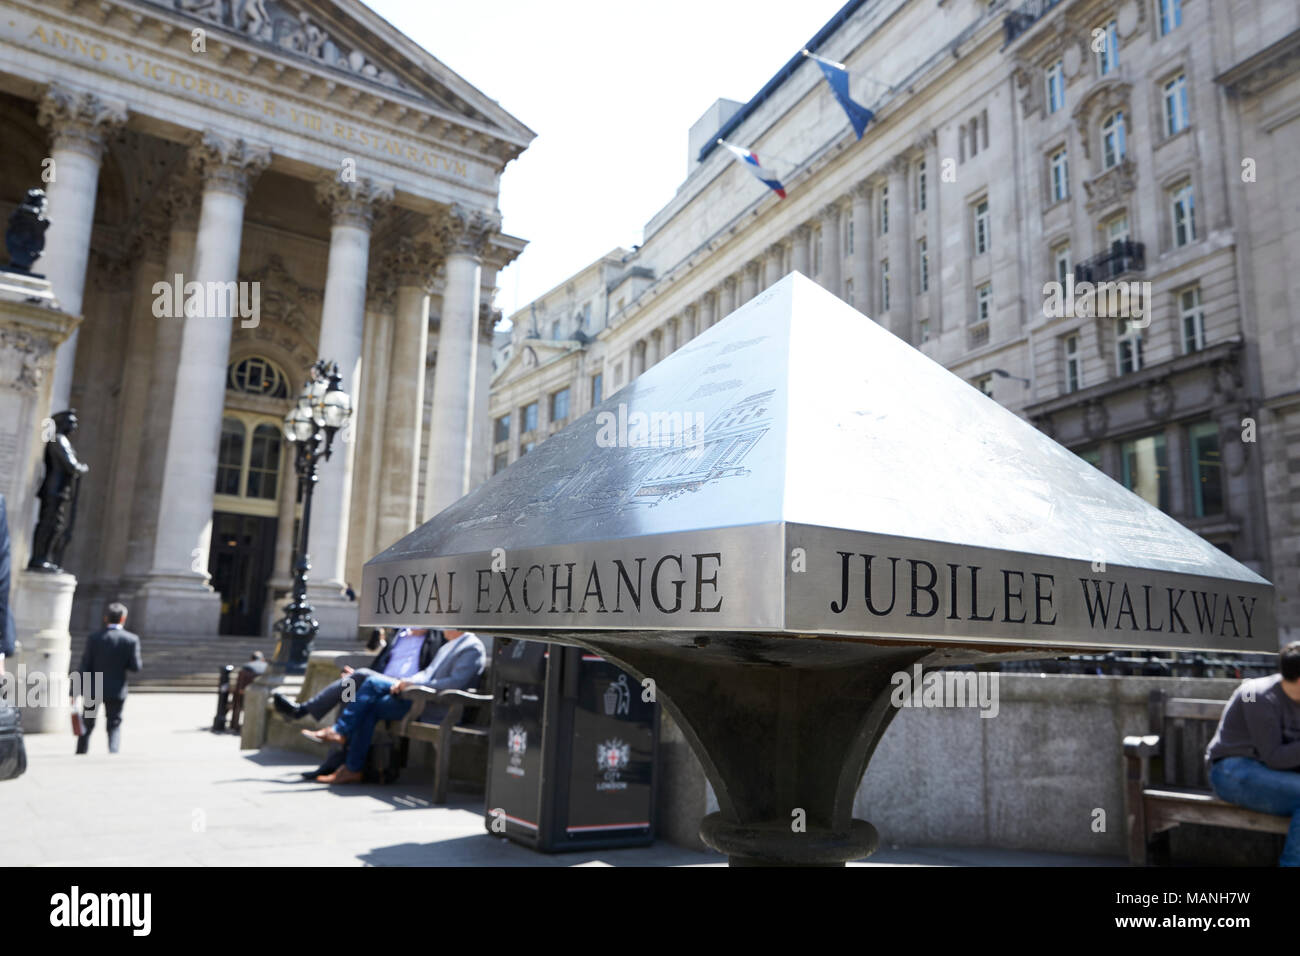 LONDON - MAY, 2017: Royal Exchange building, left, and Jubilee Walkway sign, Royal Exchange Square, London, EC3. Stock Photo